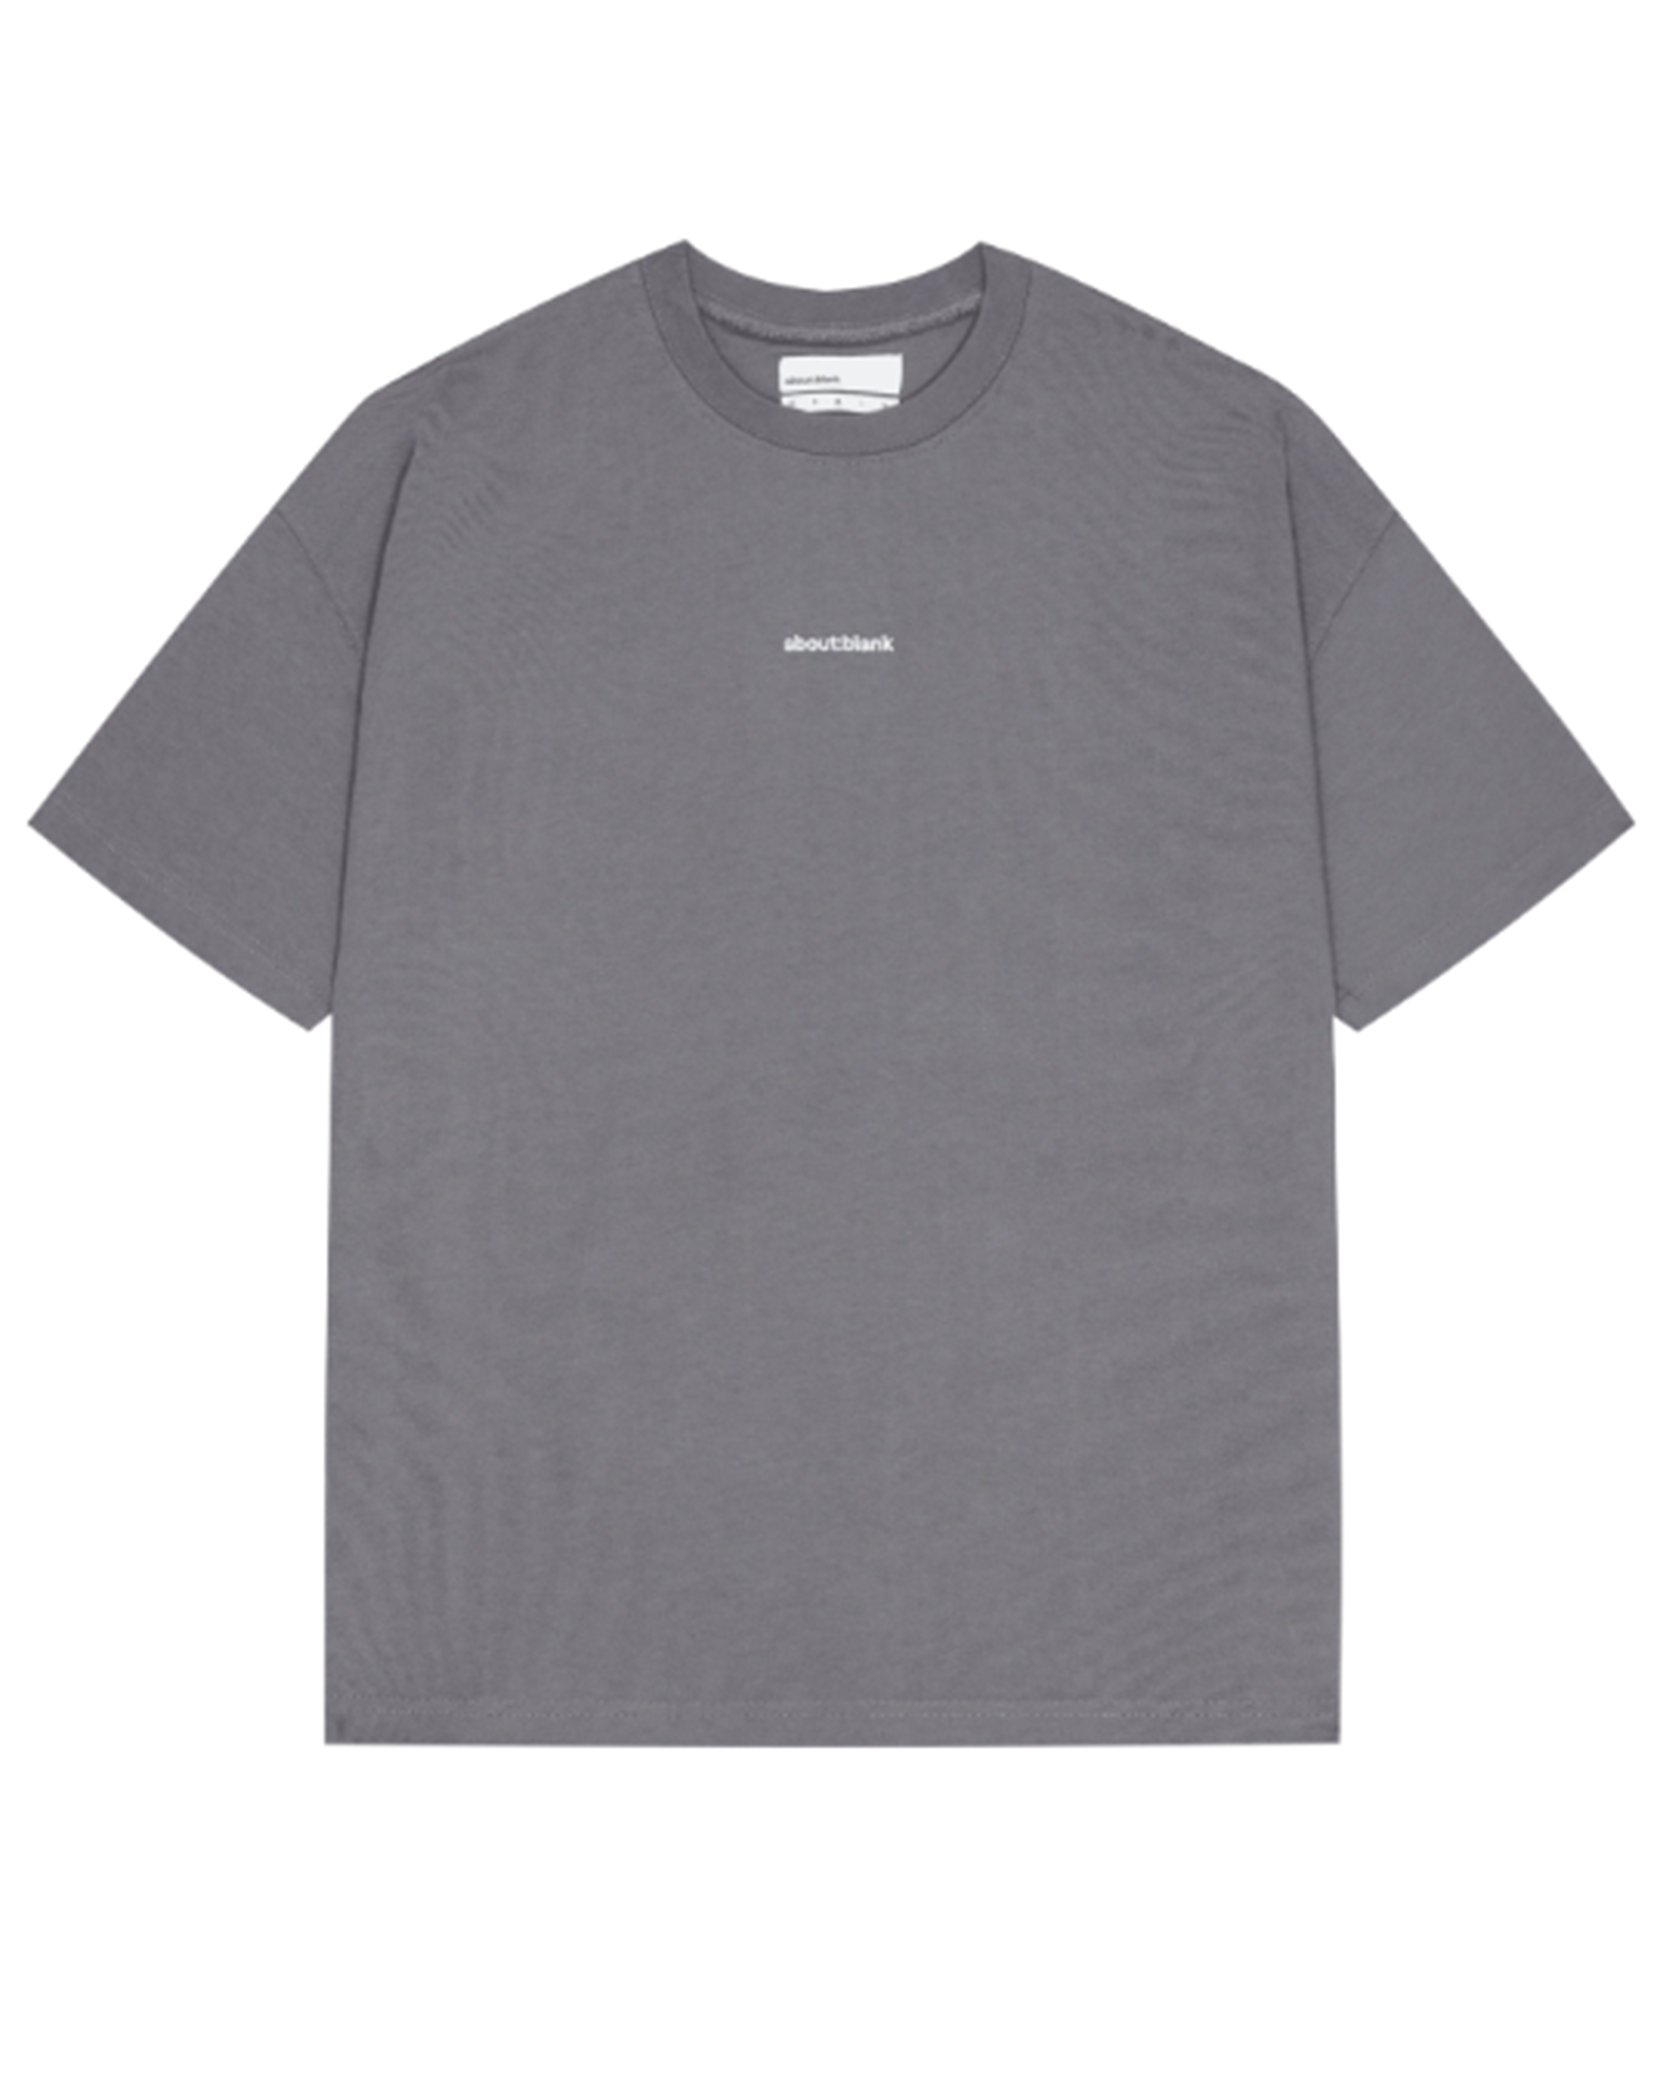 About blank - logo t-shirt charcoal